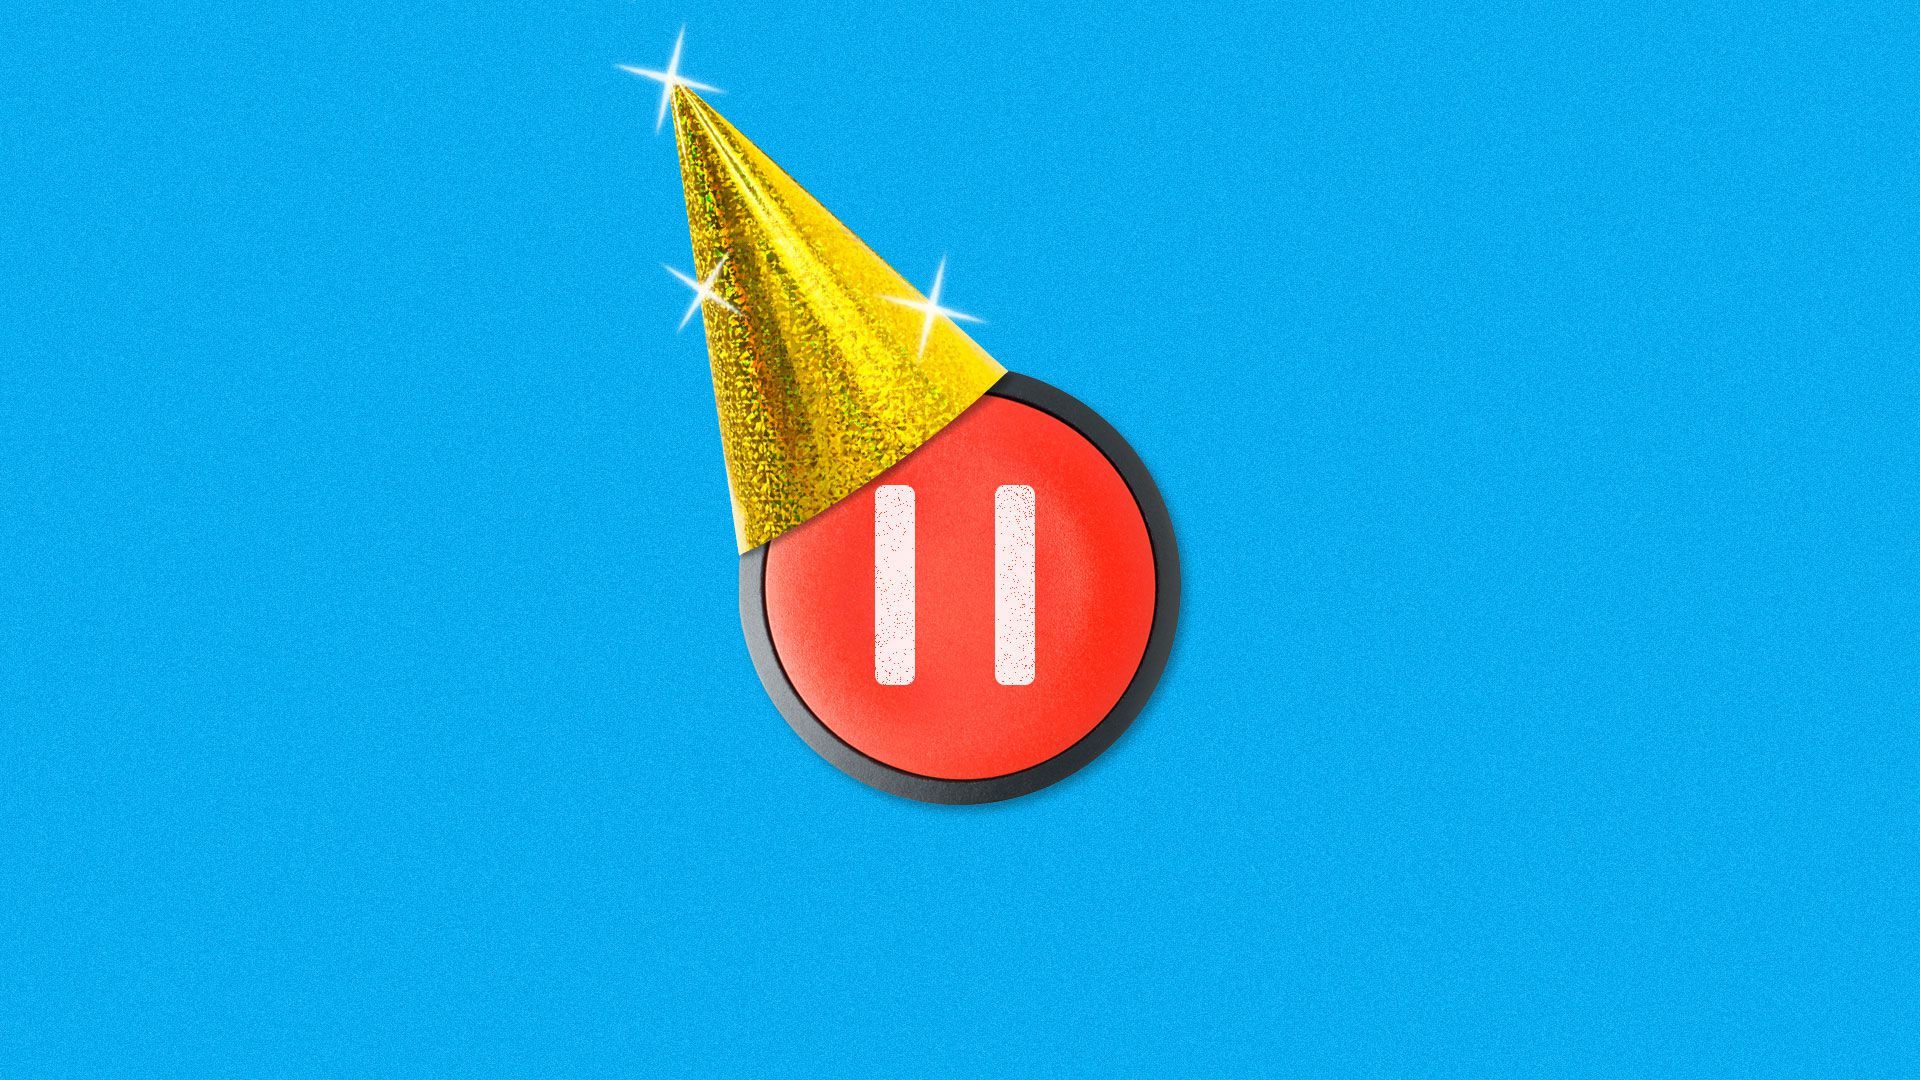 A pause button wearing a party hat.